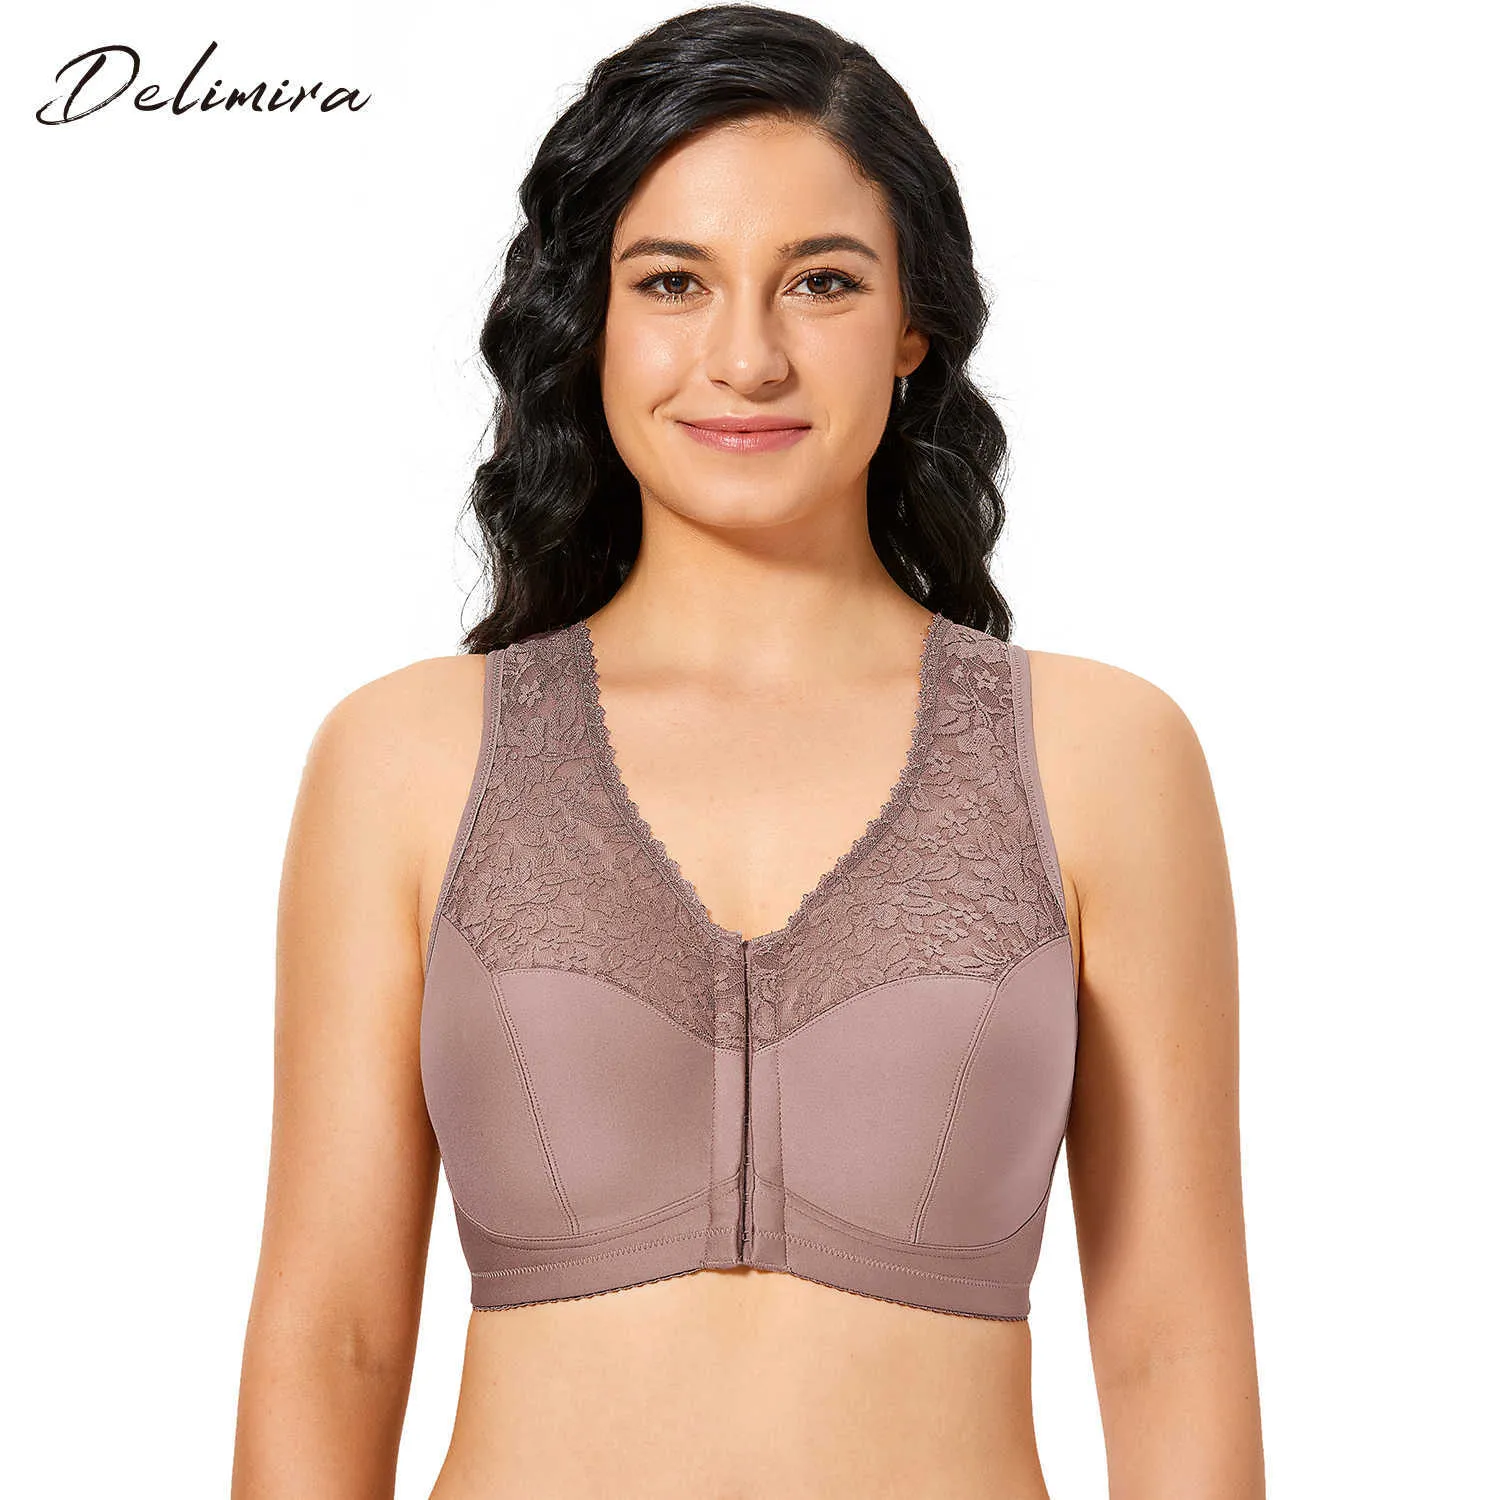 Delimira Womens Full Figure Racerback Lace Mastectomy Bras With